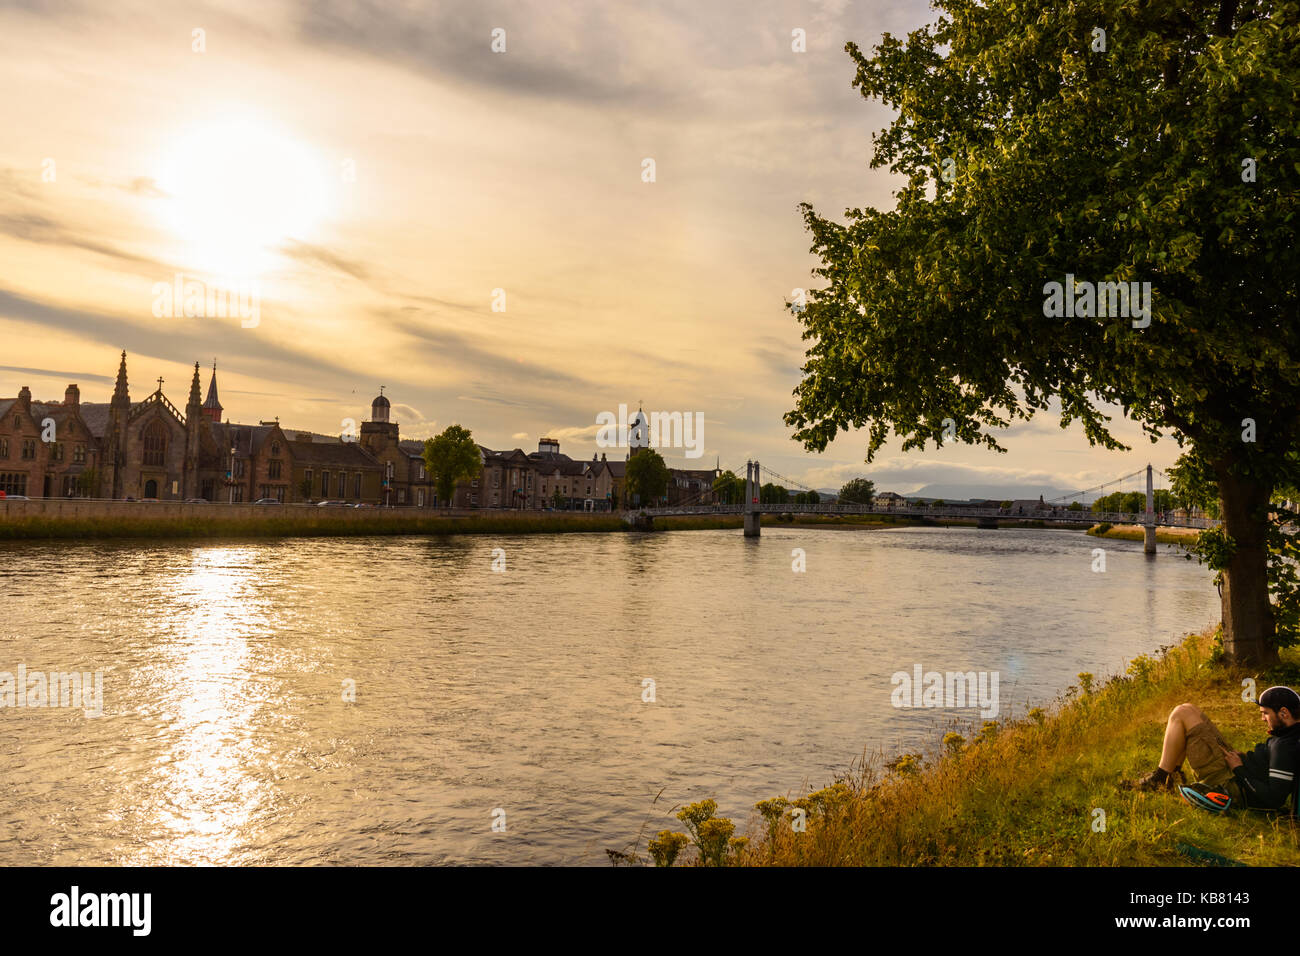 INVERNESS, SCOTLAND - AUGUST 11, 2017 - A boy relaxes on the banks of the Inverness River during sunset. Stock Photo